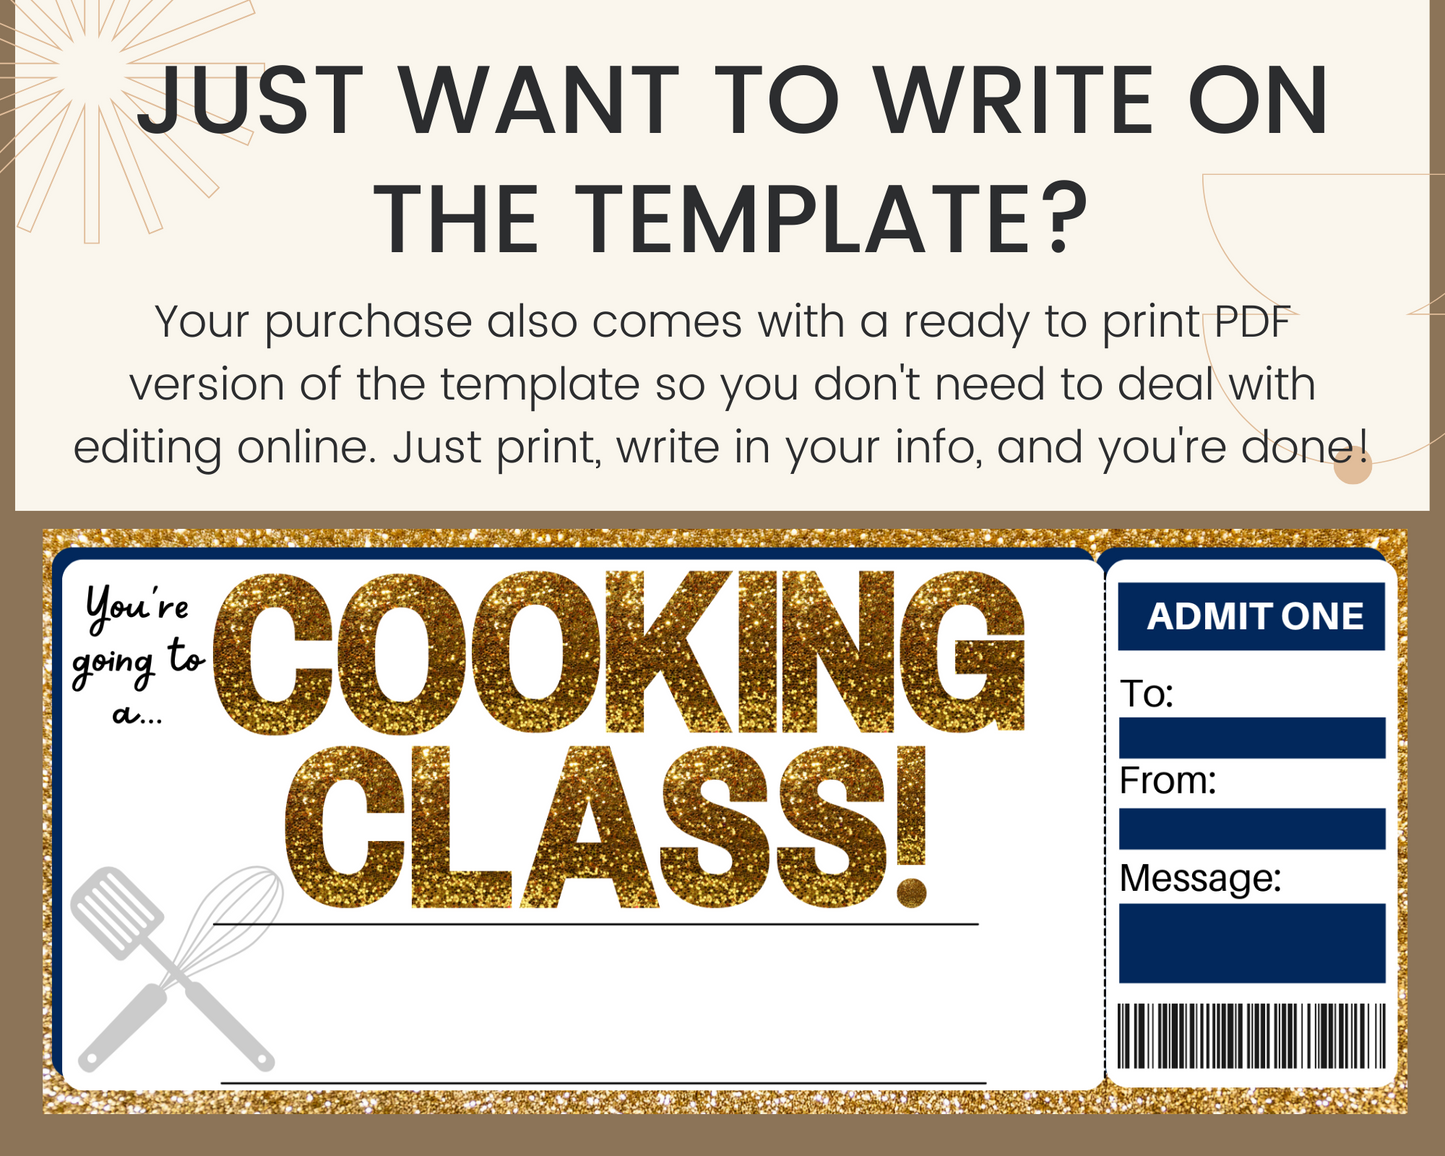 Cooking Class Gift Ticket Template